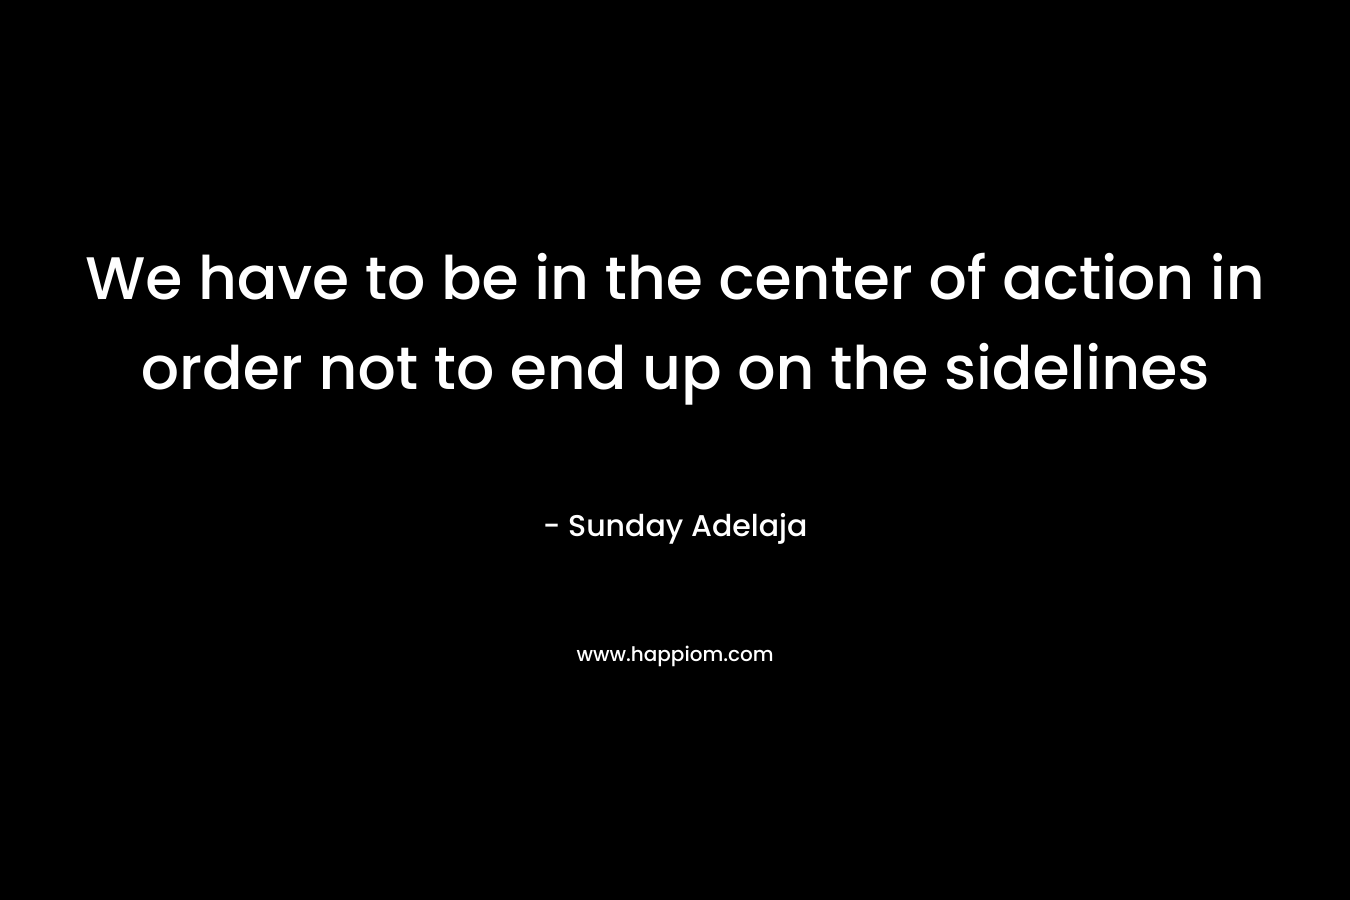 We have to be in the center of action in order not to end up on the sidelines